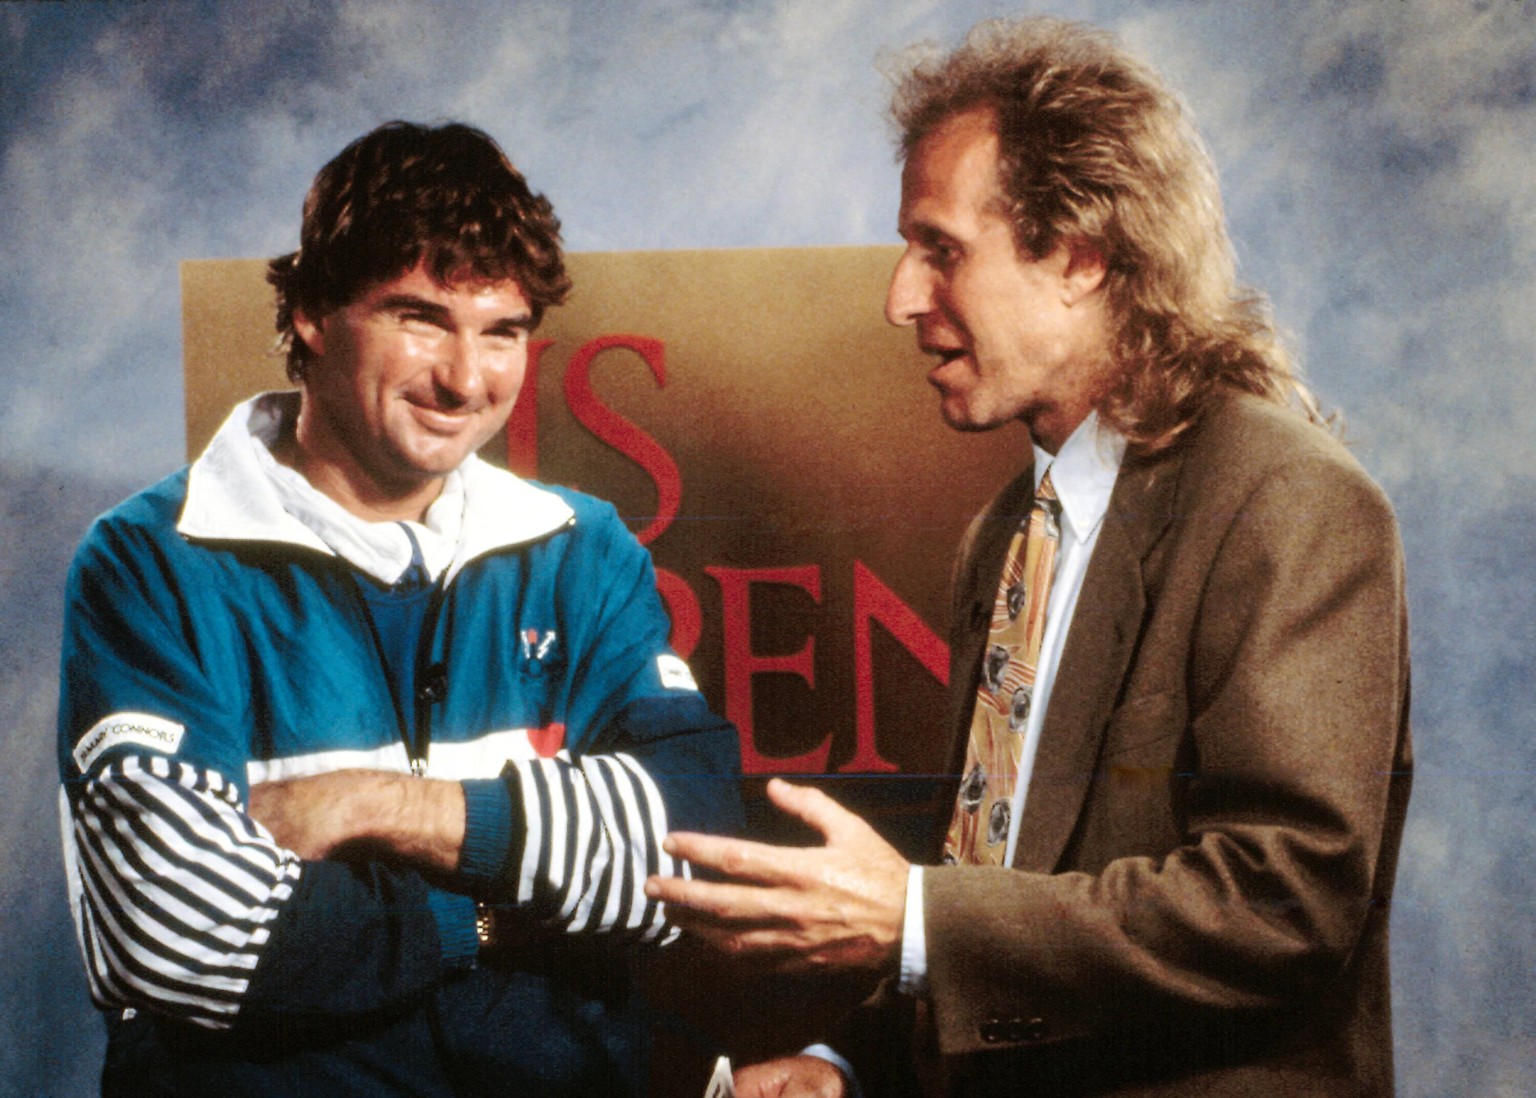 IMAGO / Everett Collection

Jimmy Connors, being interviewed by Vitas Gerulaitis, after he became the oldest (at age 39), U.S. Open semifinalist ever, in 1991. (c)USA Network. Courtesy: Everett Collec ...